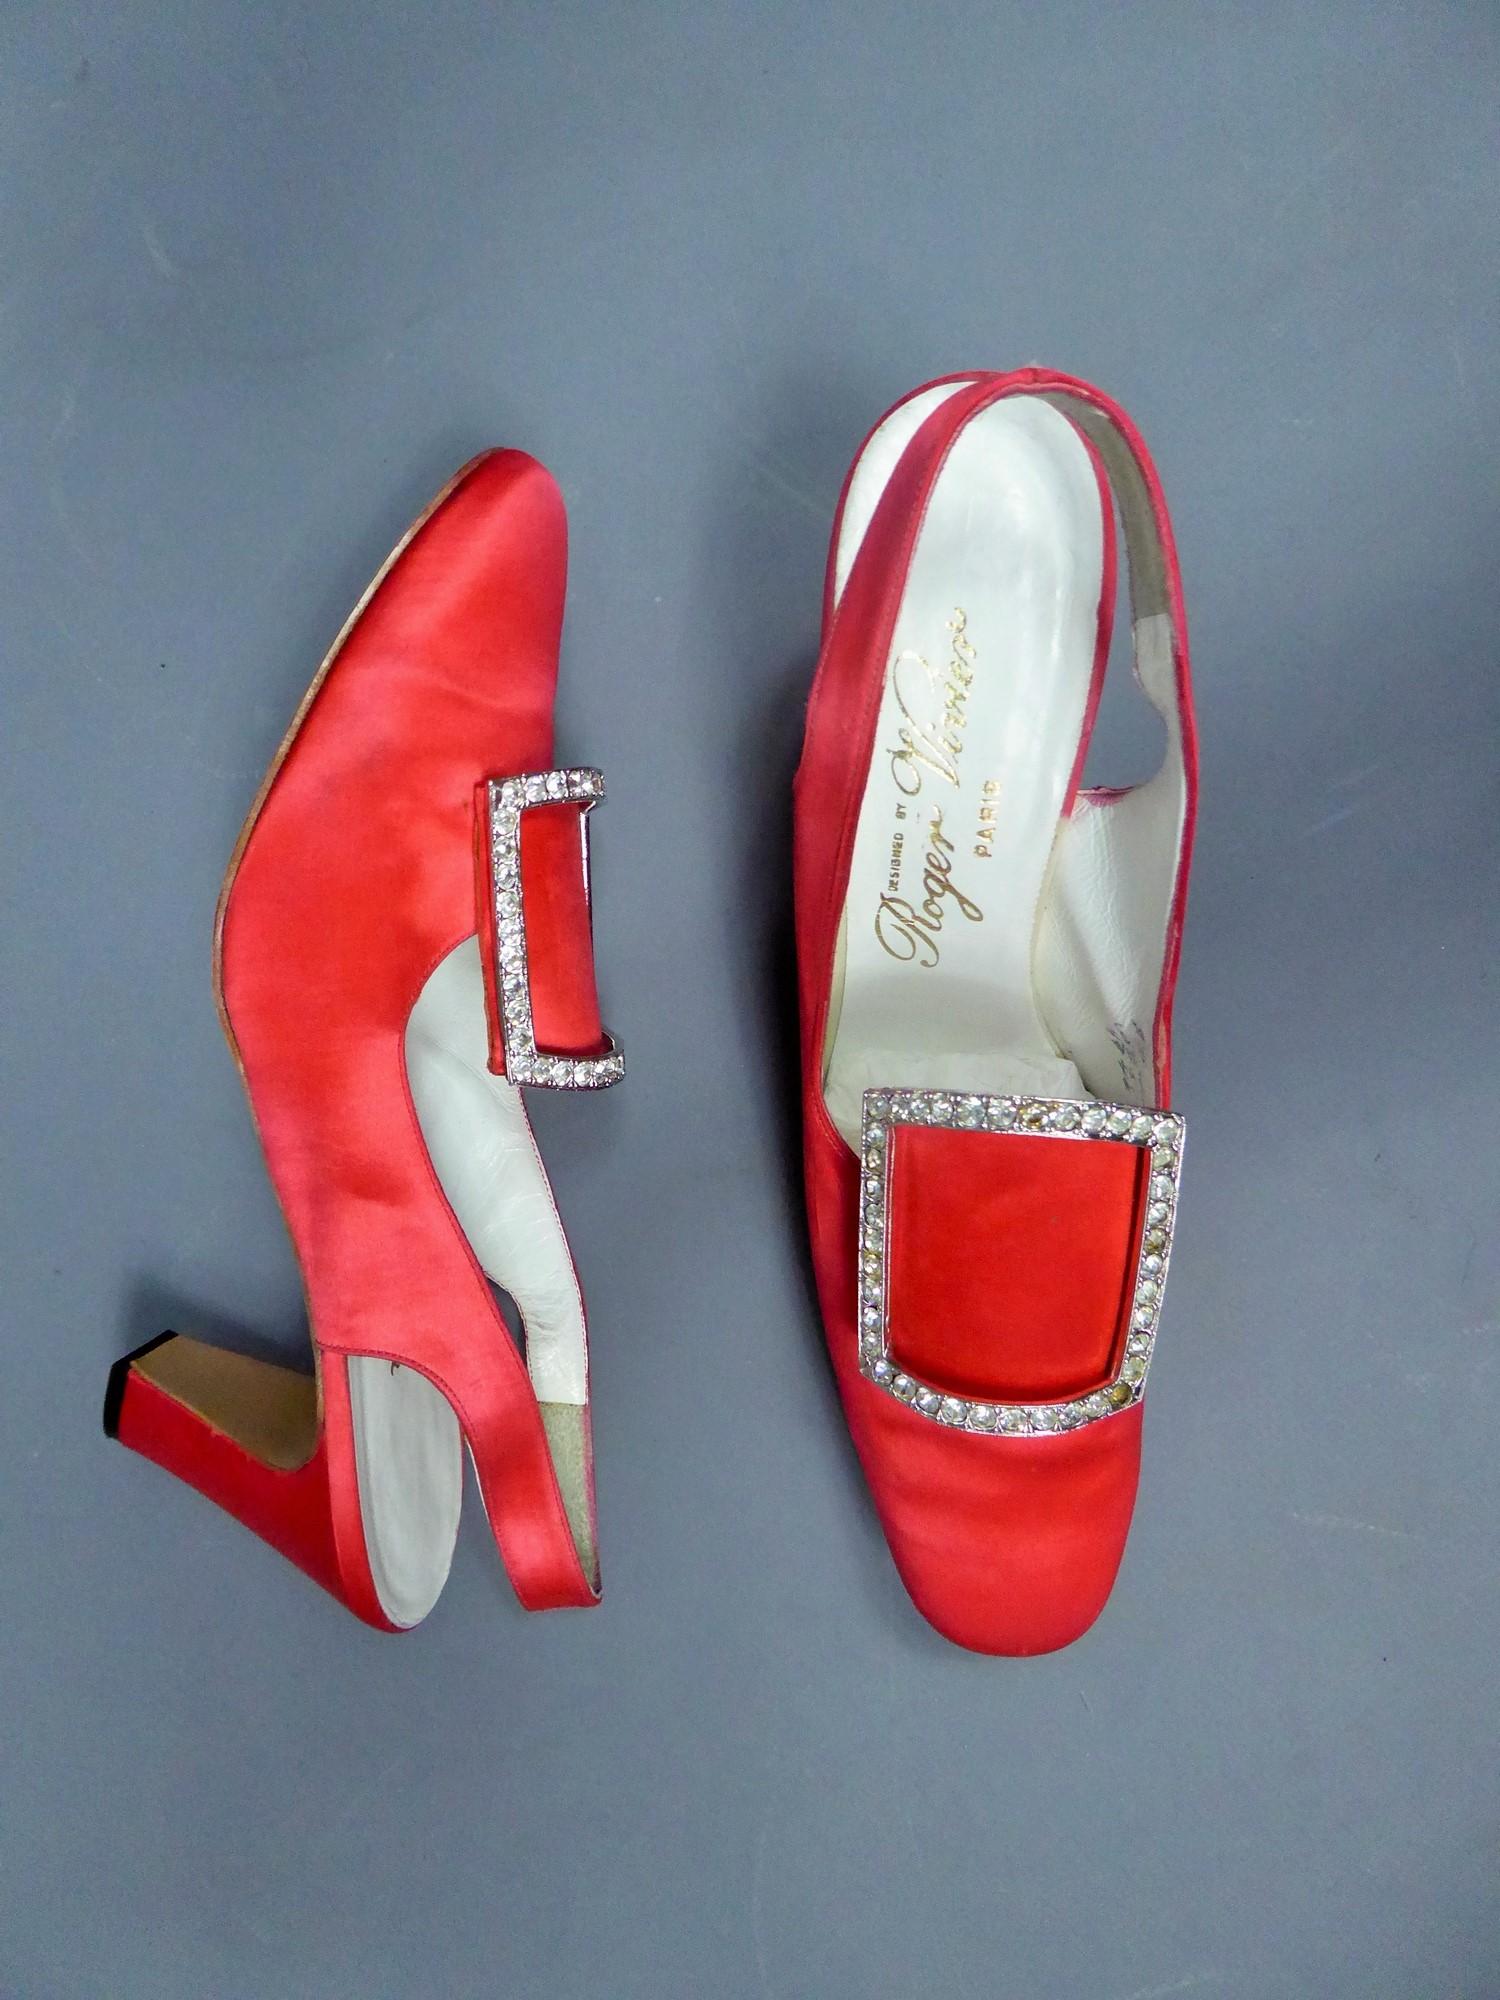 An Iconic and Collectible Pair of Roger Vivier Red Satin Pumps Circa 1970 12